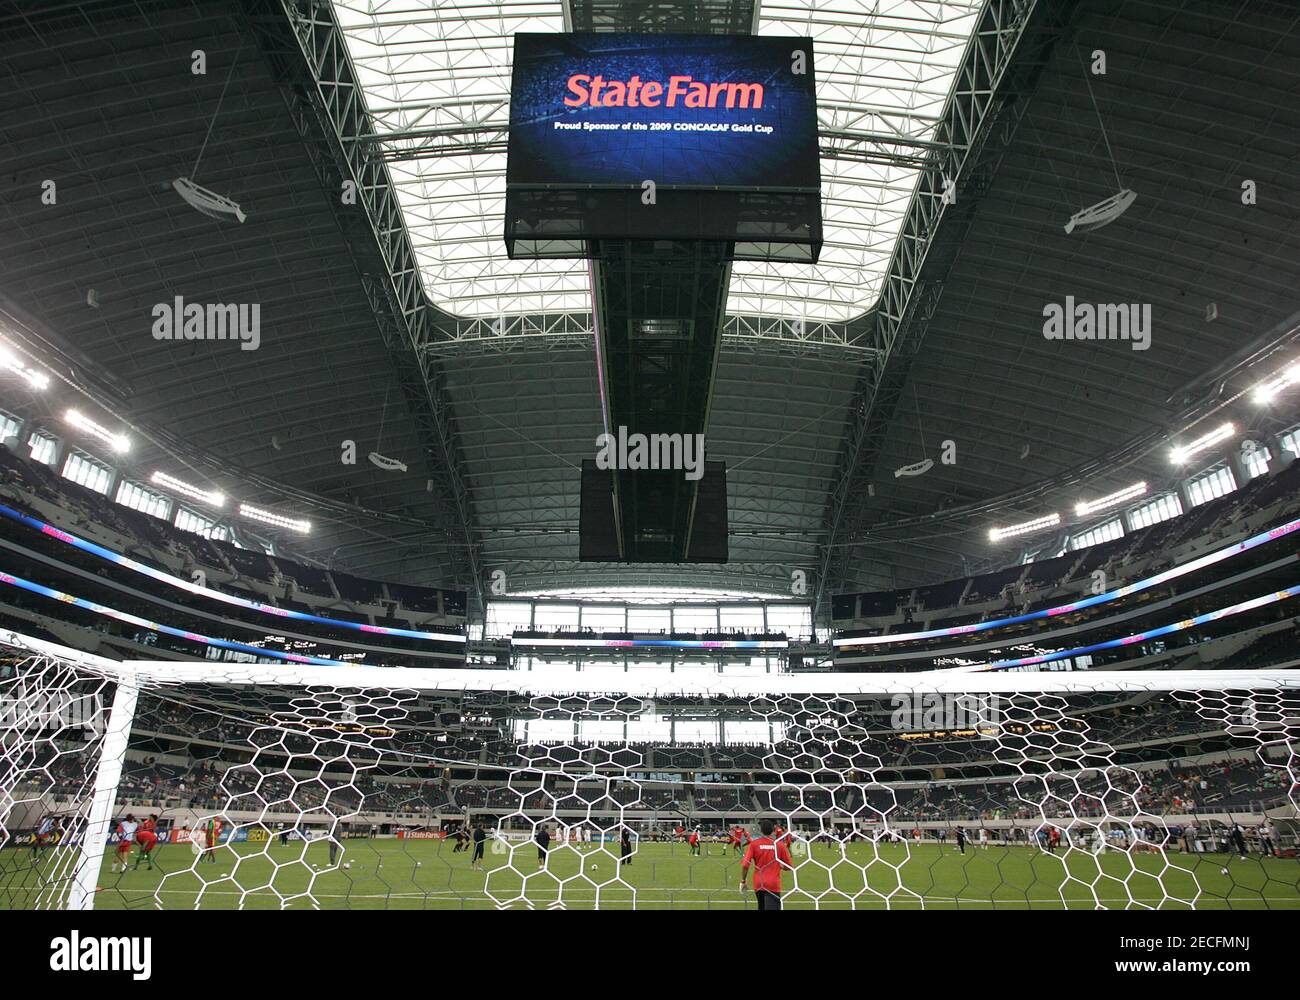 Dallas Cowboys Stadium during the 2009 CONCACAF soccer championship quarter-final matches on July 19 2009. Stock Photo